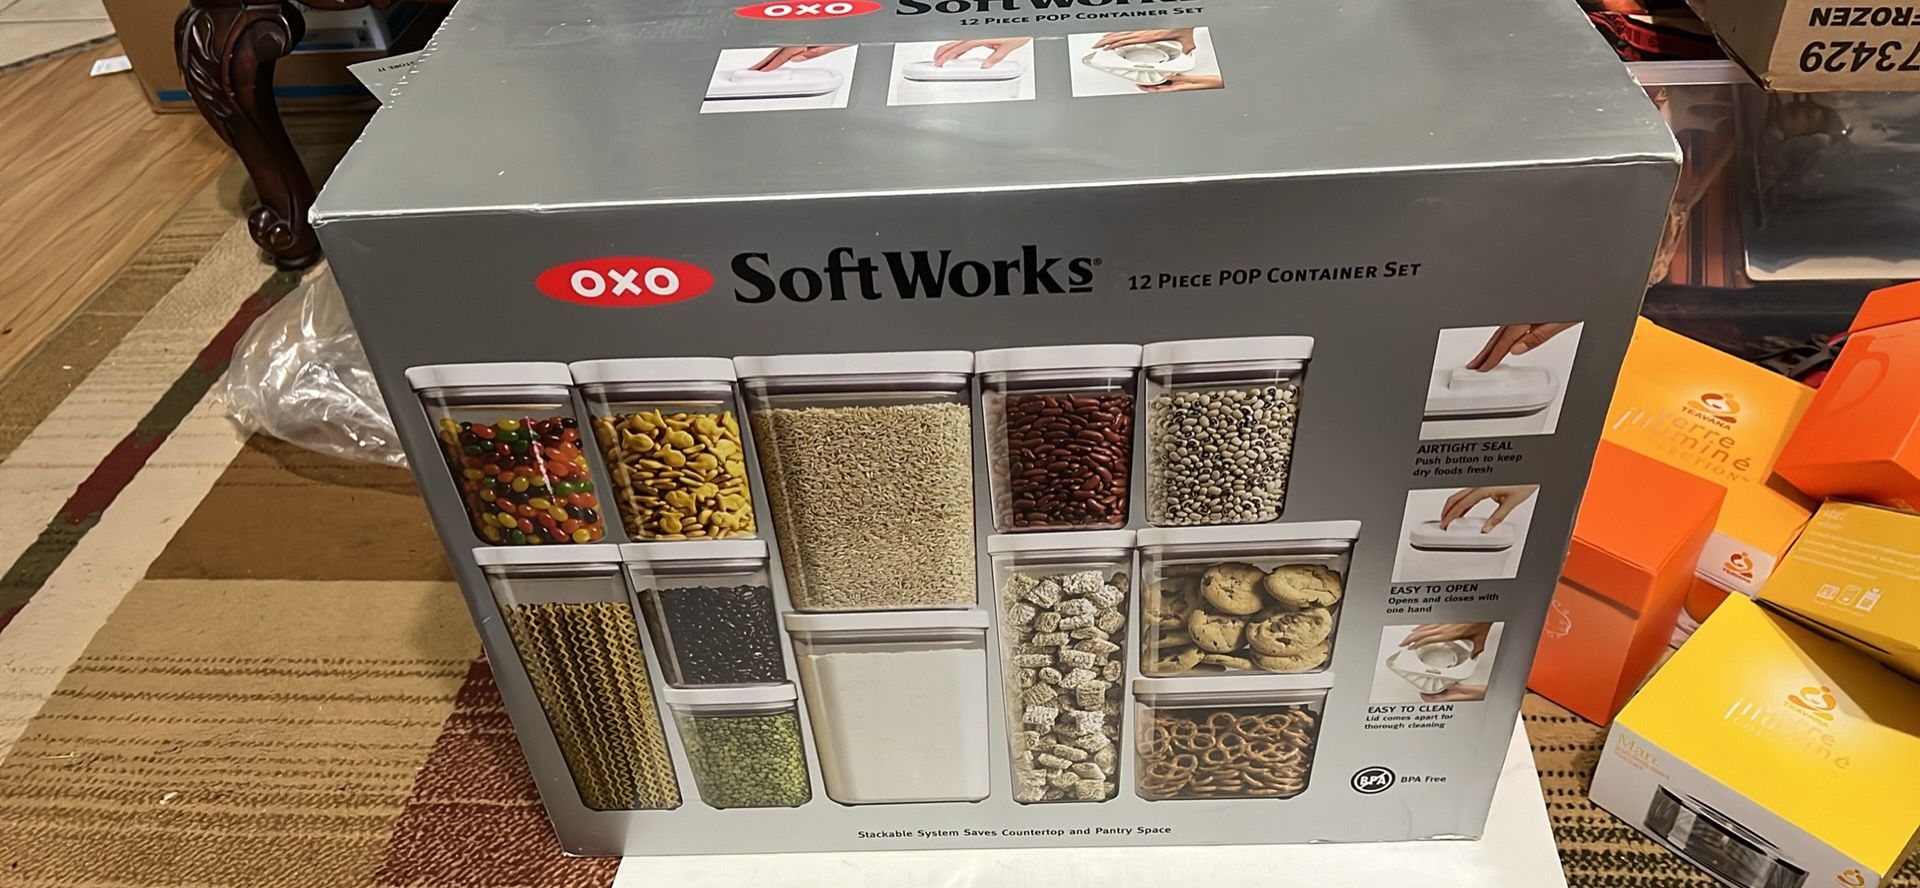 OXO Softworks 12 Piece Pop Container Set 